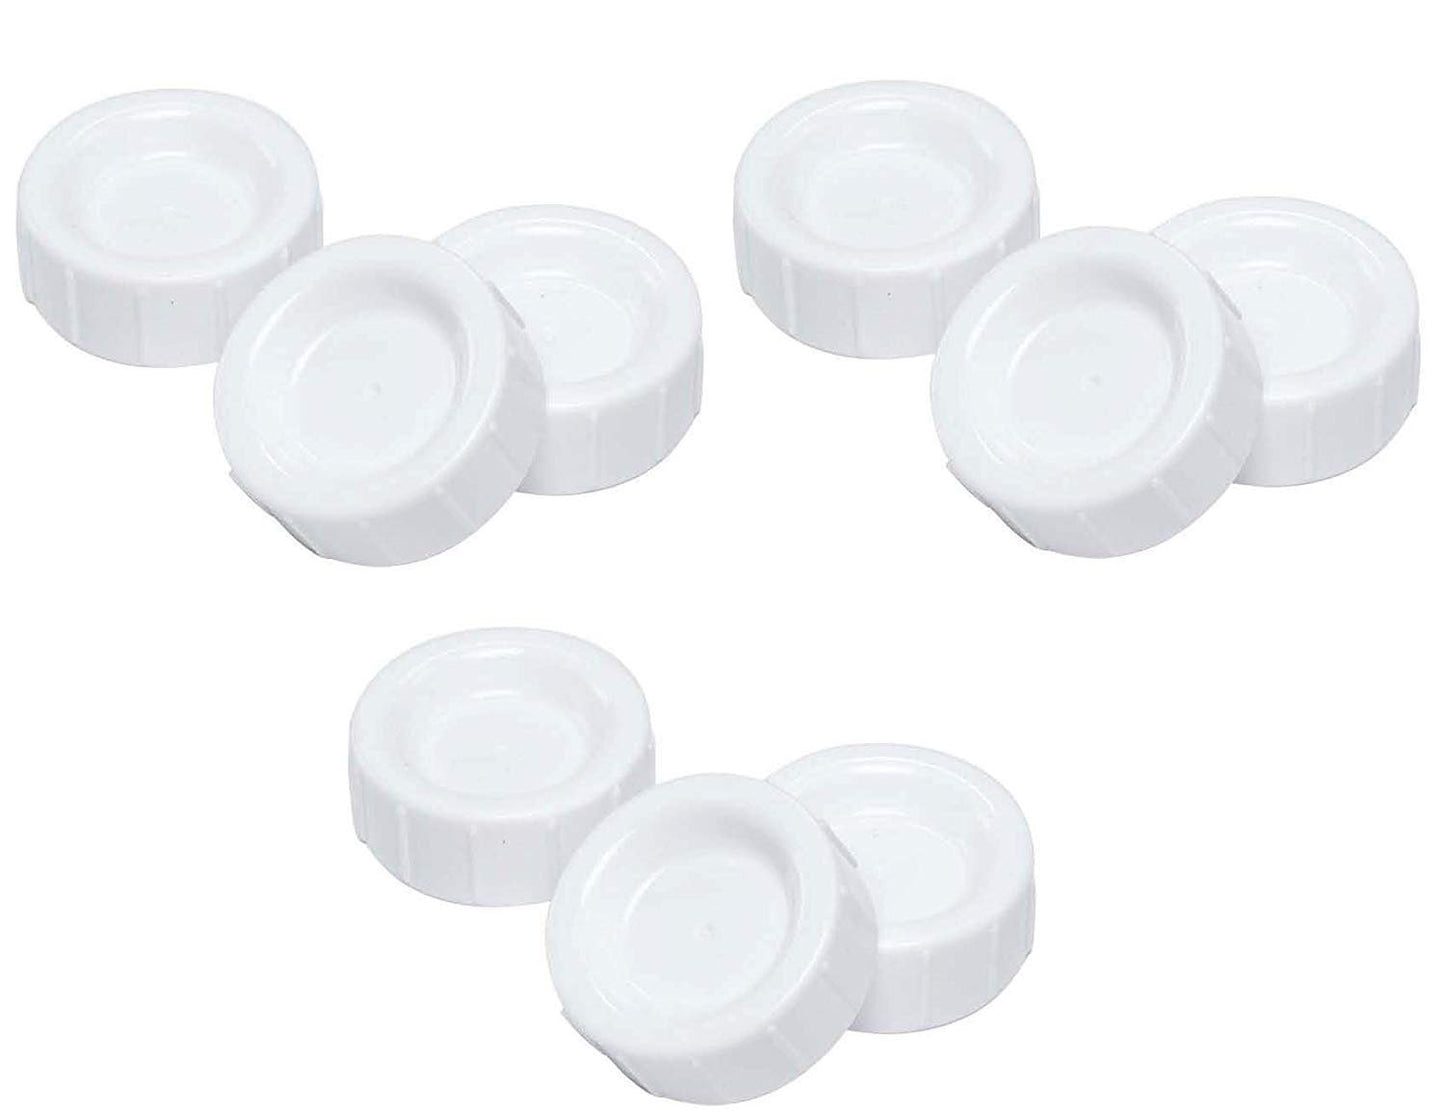 Dr. Brown's Natural Flow Standard Storage Travel Caps Replacement, 9 Count